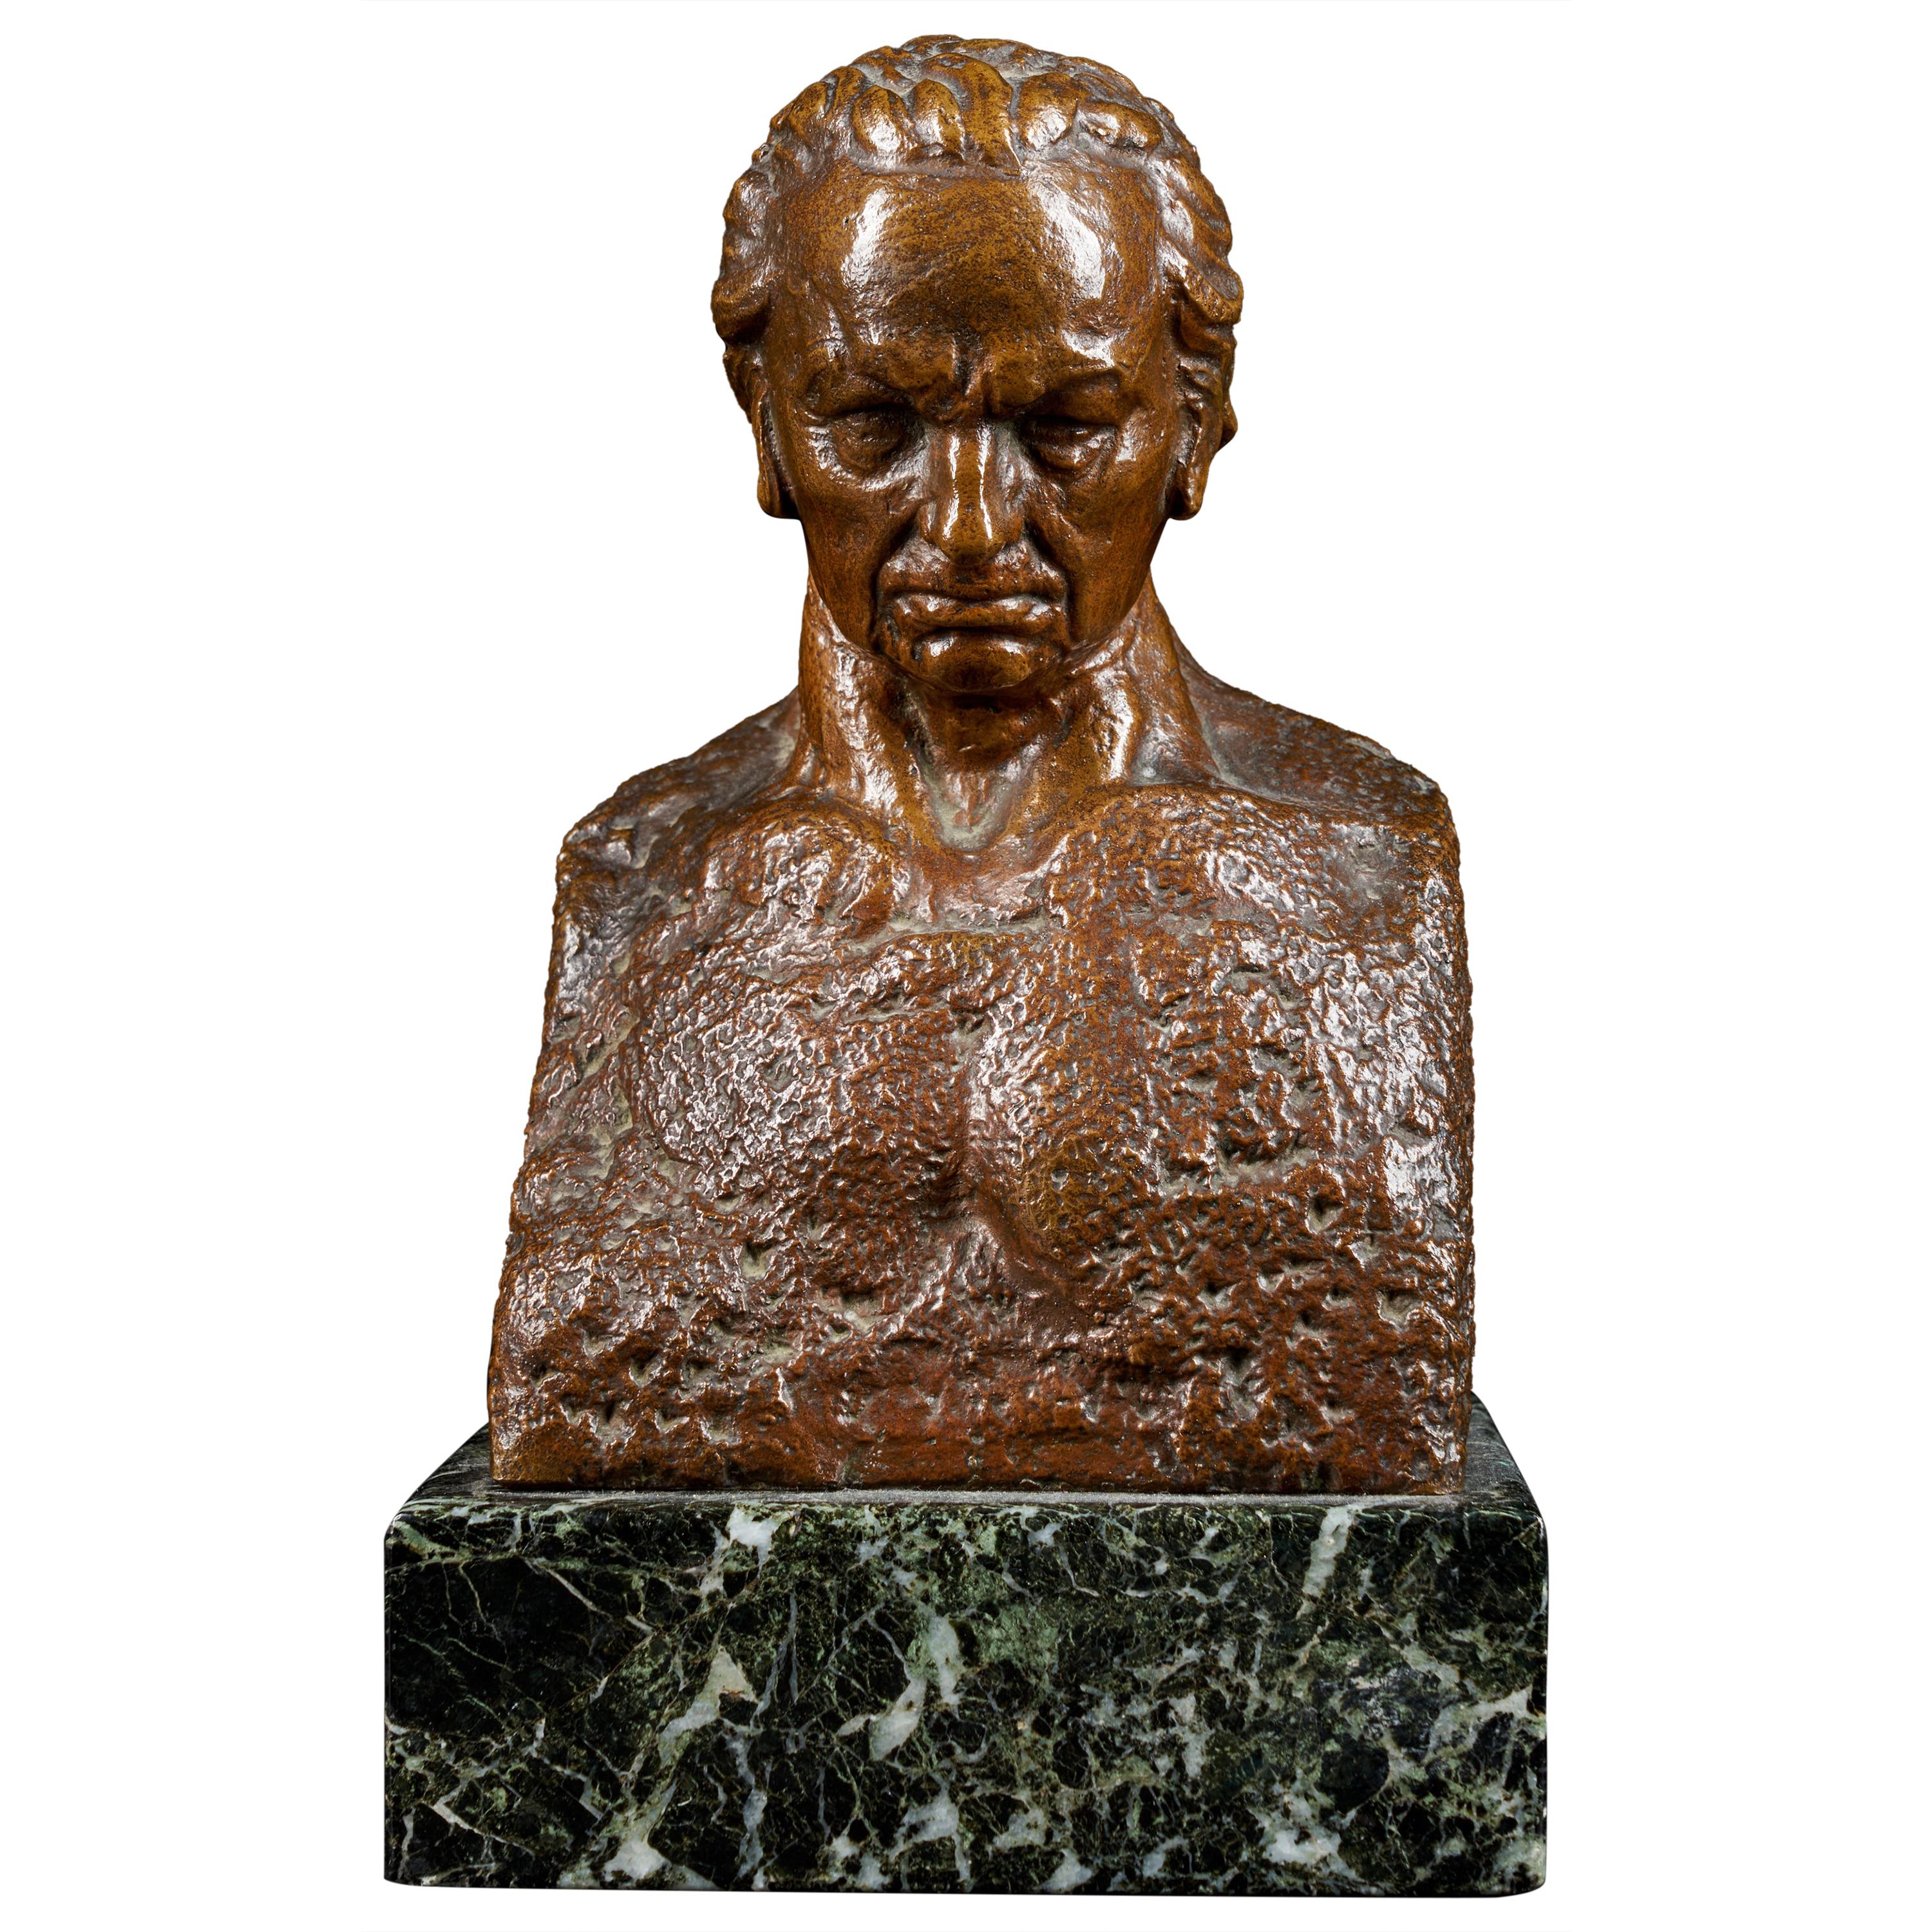 20th Century, Julio Antonio, Bronze Bust of a Man, Signed on the Back